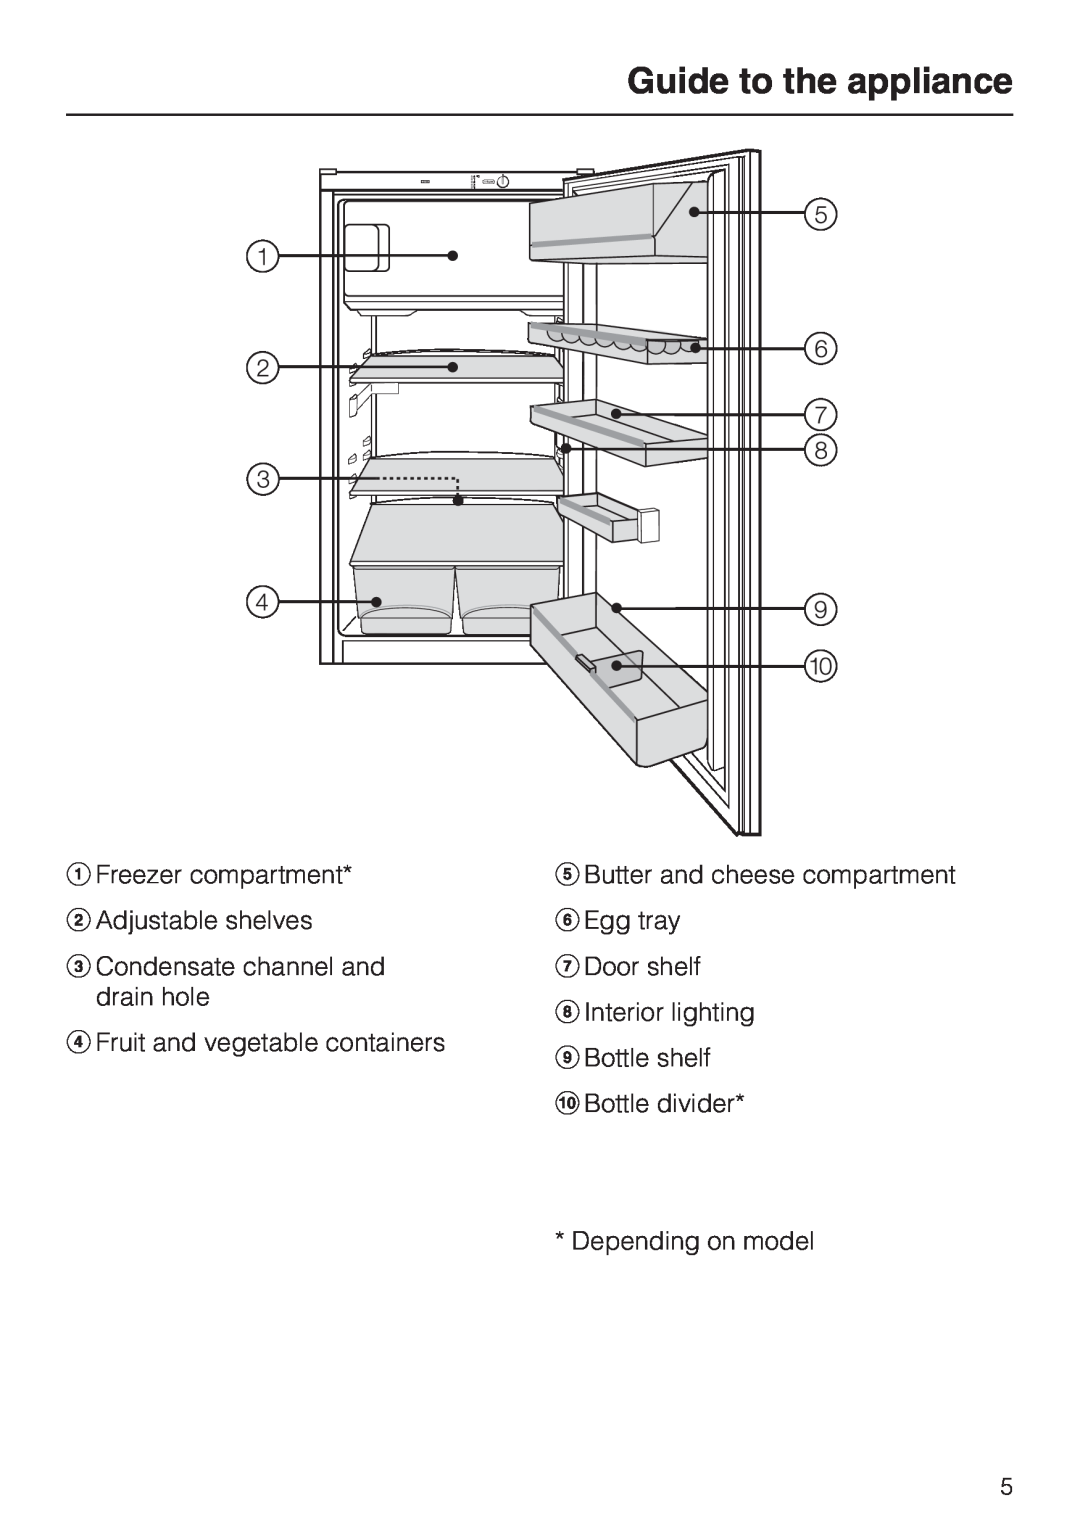 Miele K 9212 I Guide to the appliance, aFreezer compartment bAdjustable shelves, cCondensate channel and drain hole 